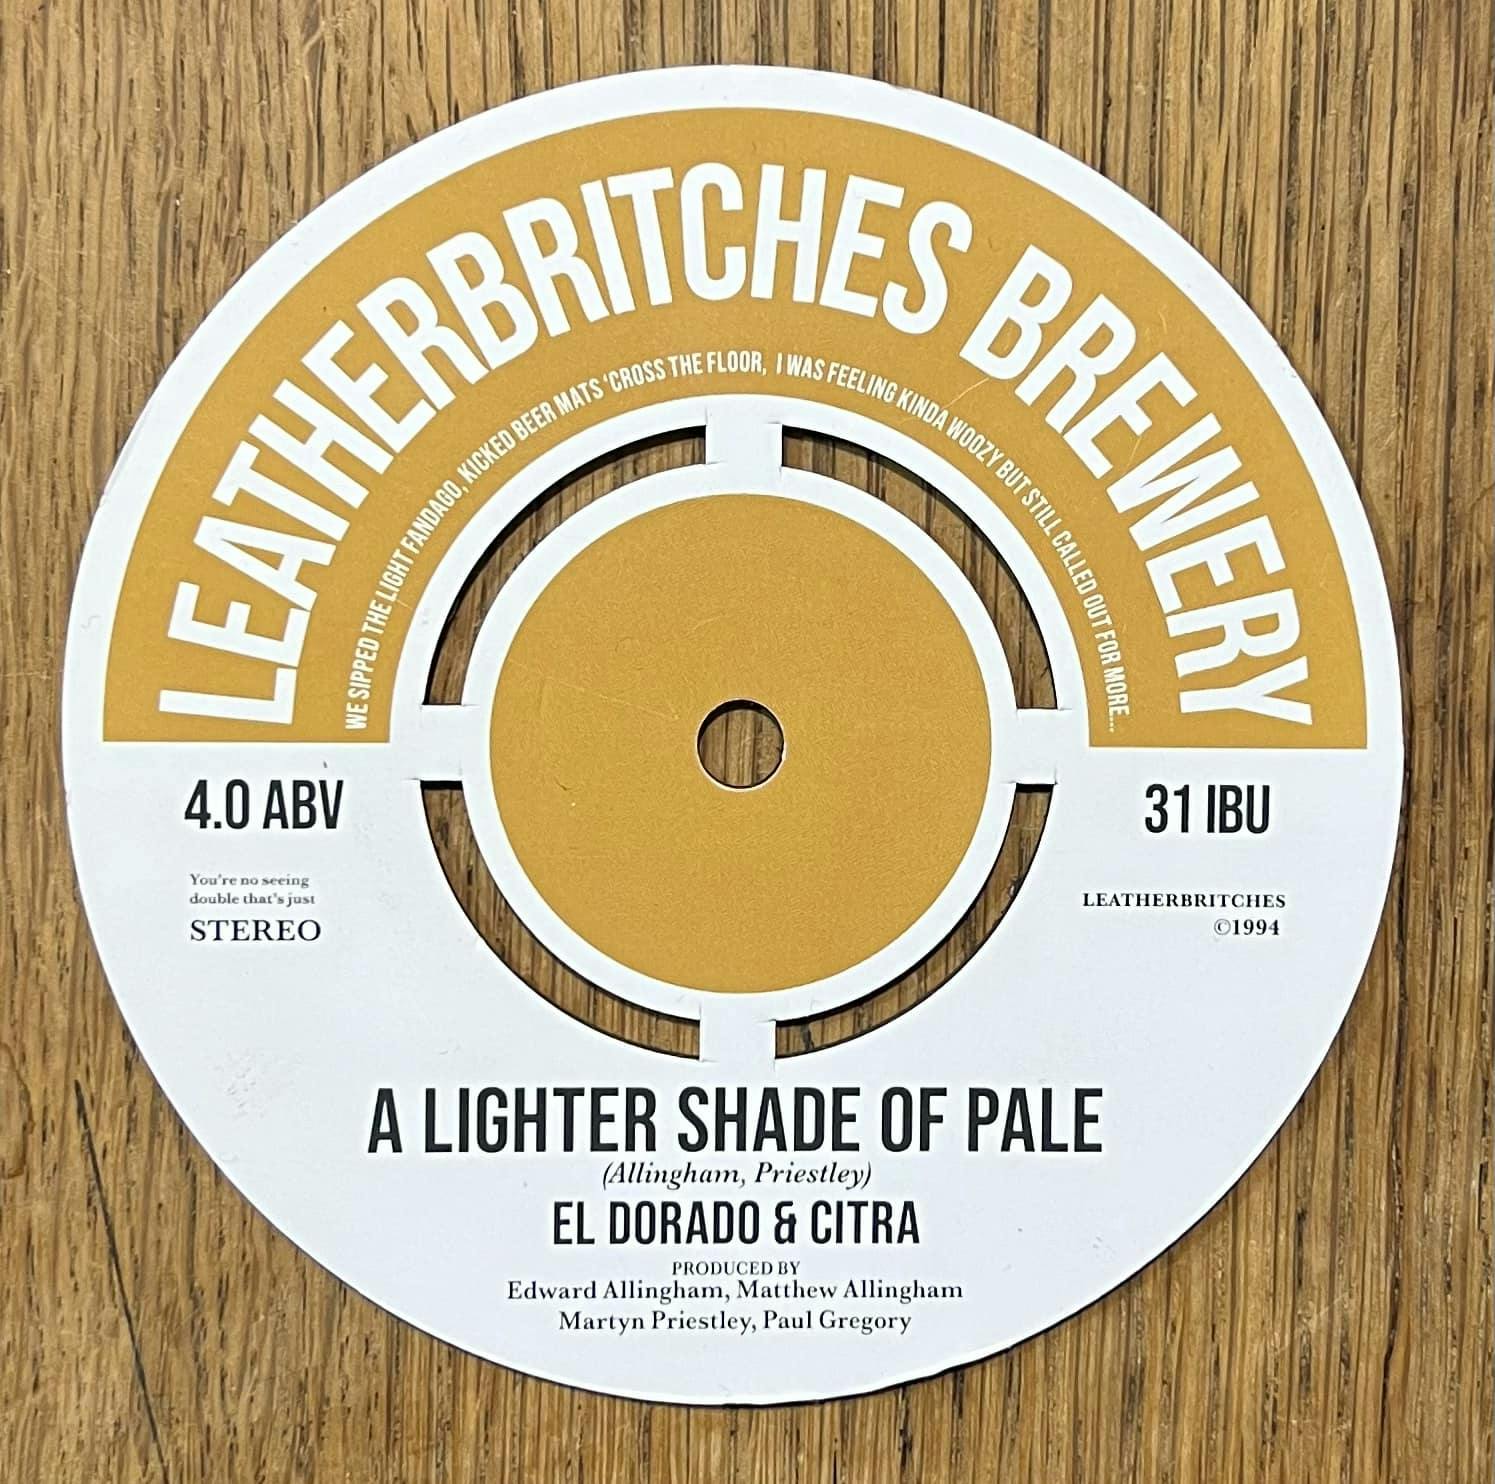 Leatherbritches - A Lighter Shade of Pale